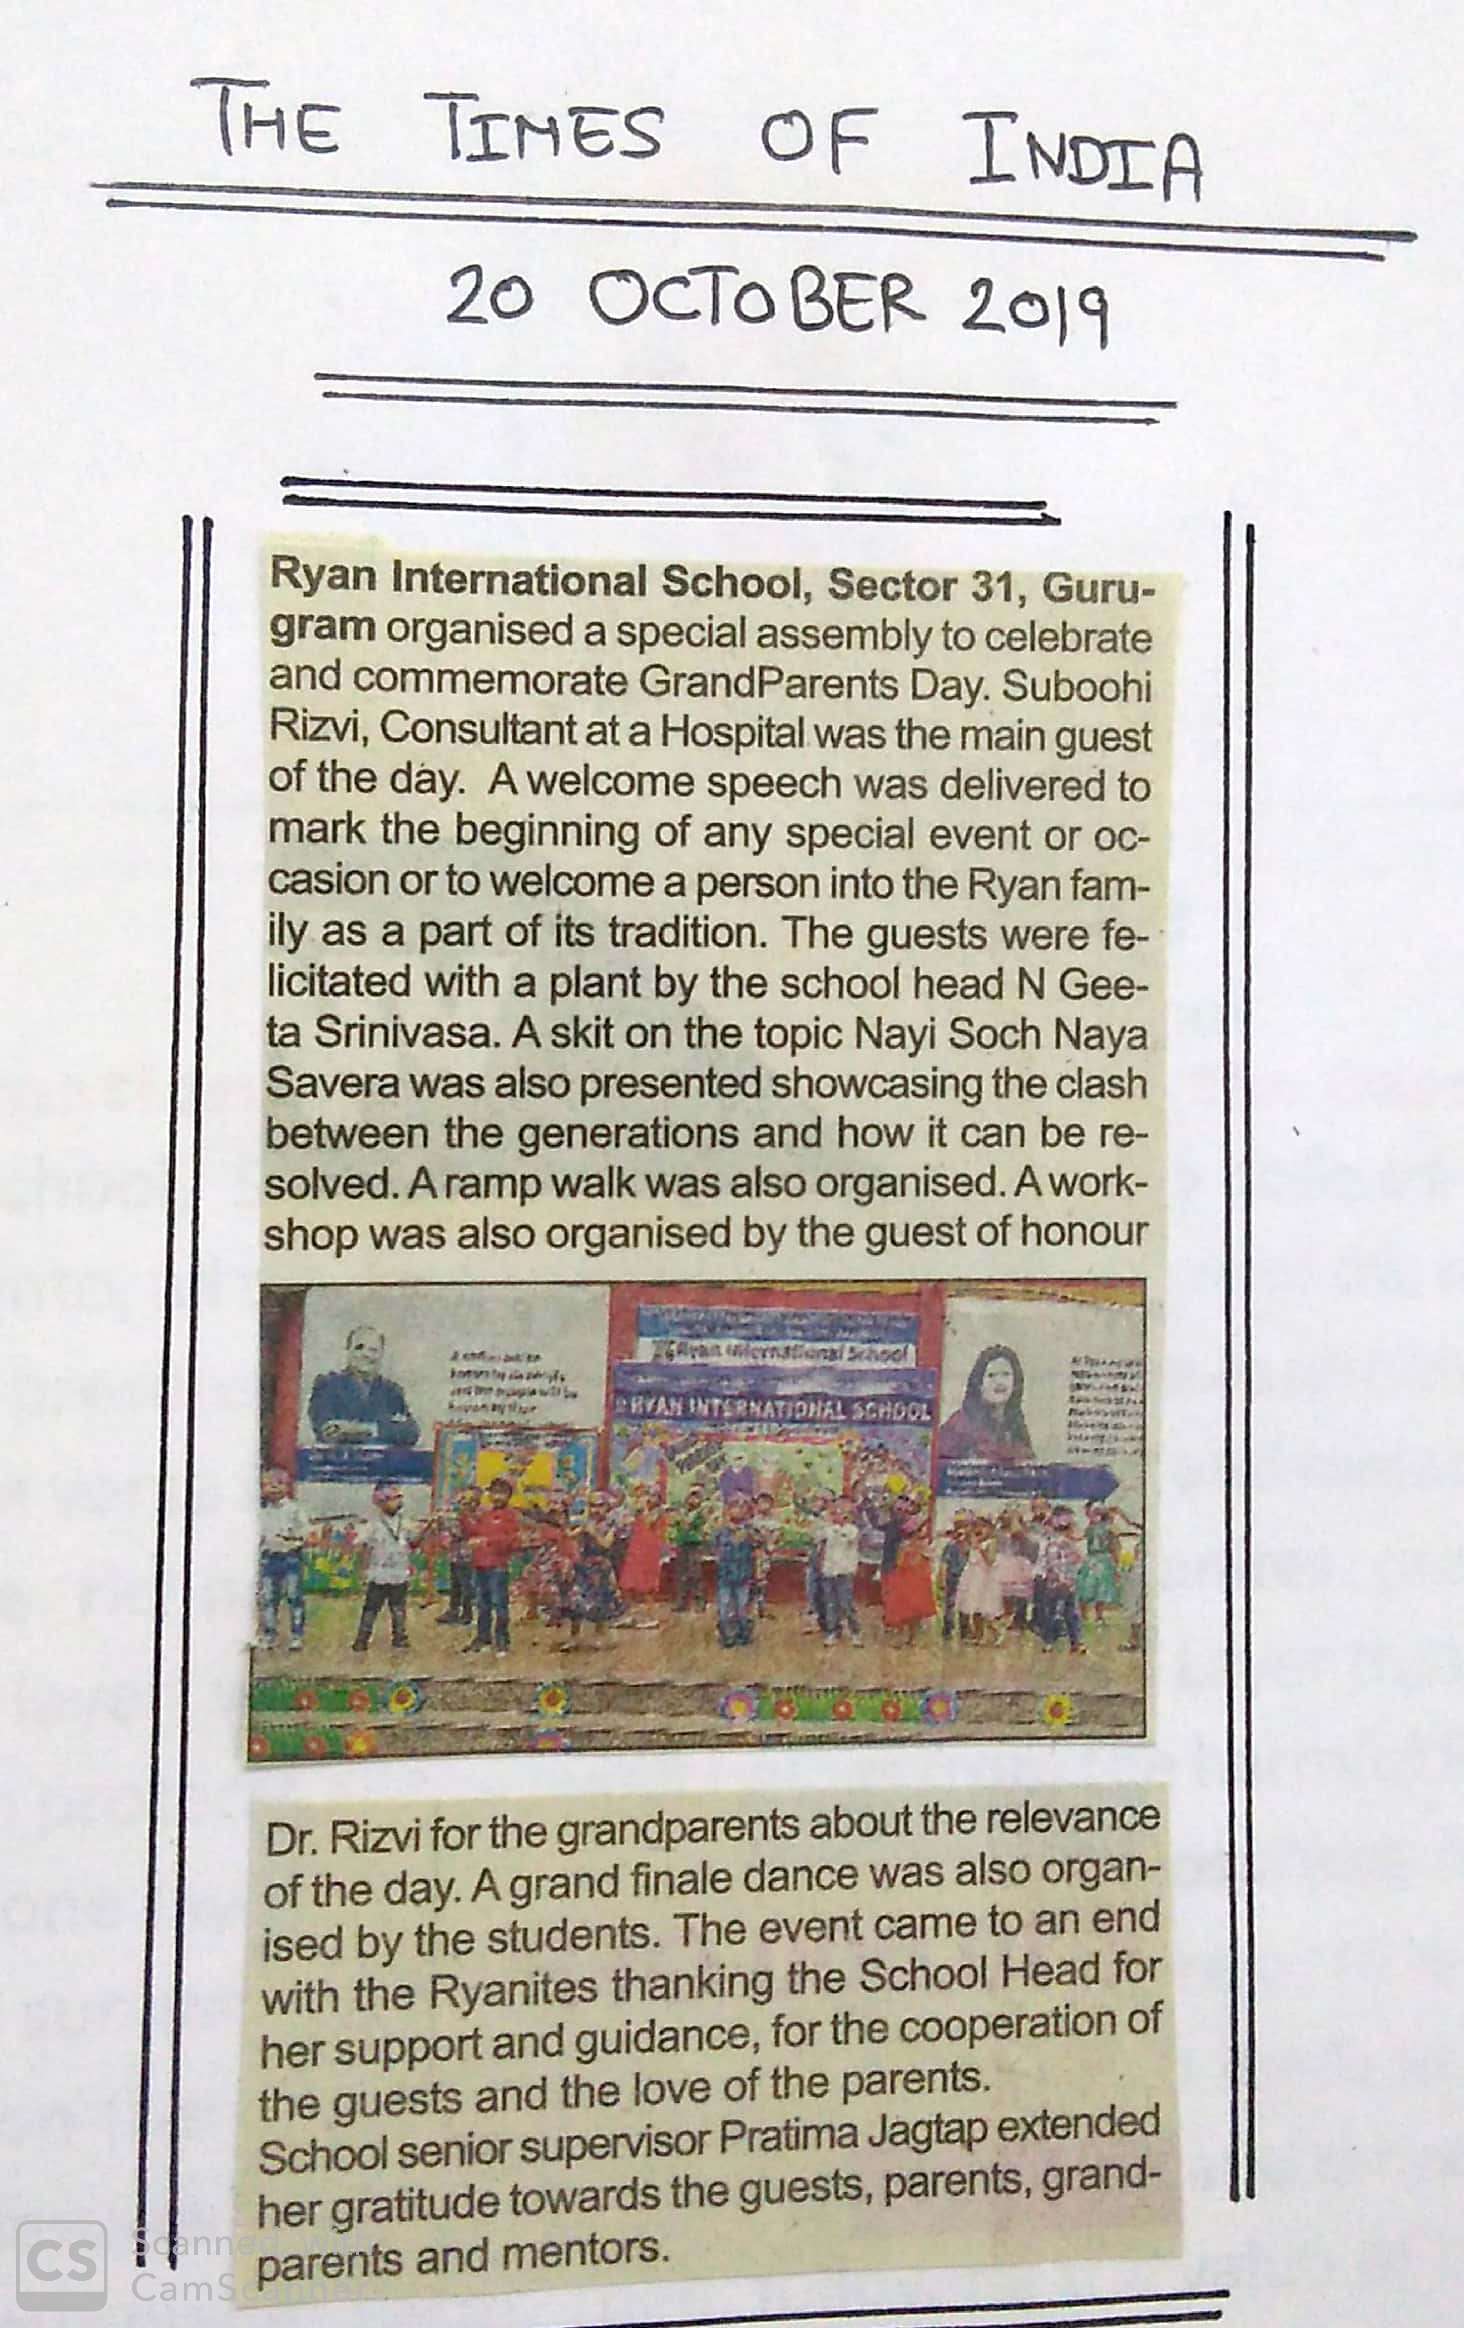 Organised a special assembly to celebrate Grandparents’ Day - Ryan International School, Sec 31 Gurgaon - Ryan Group